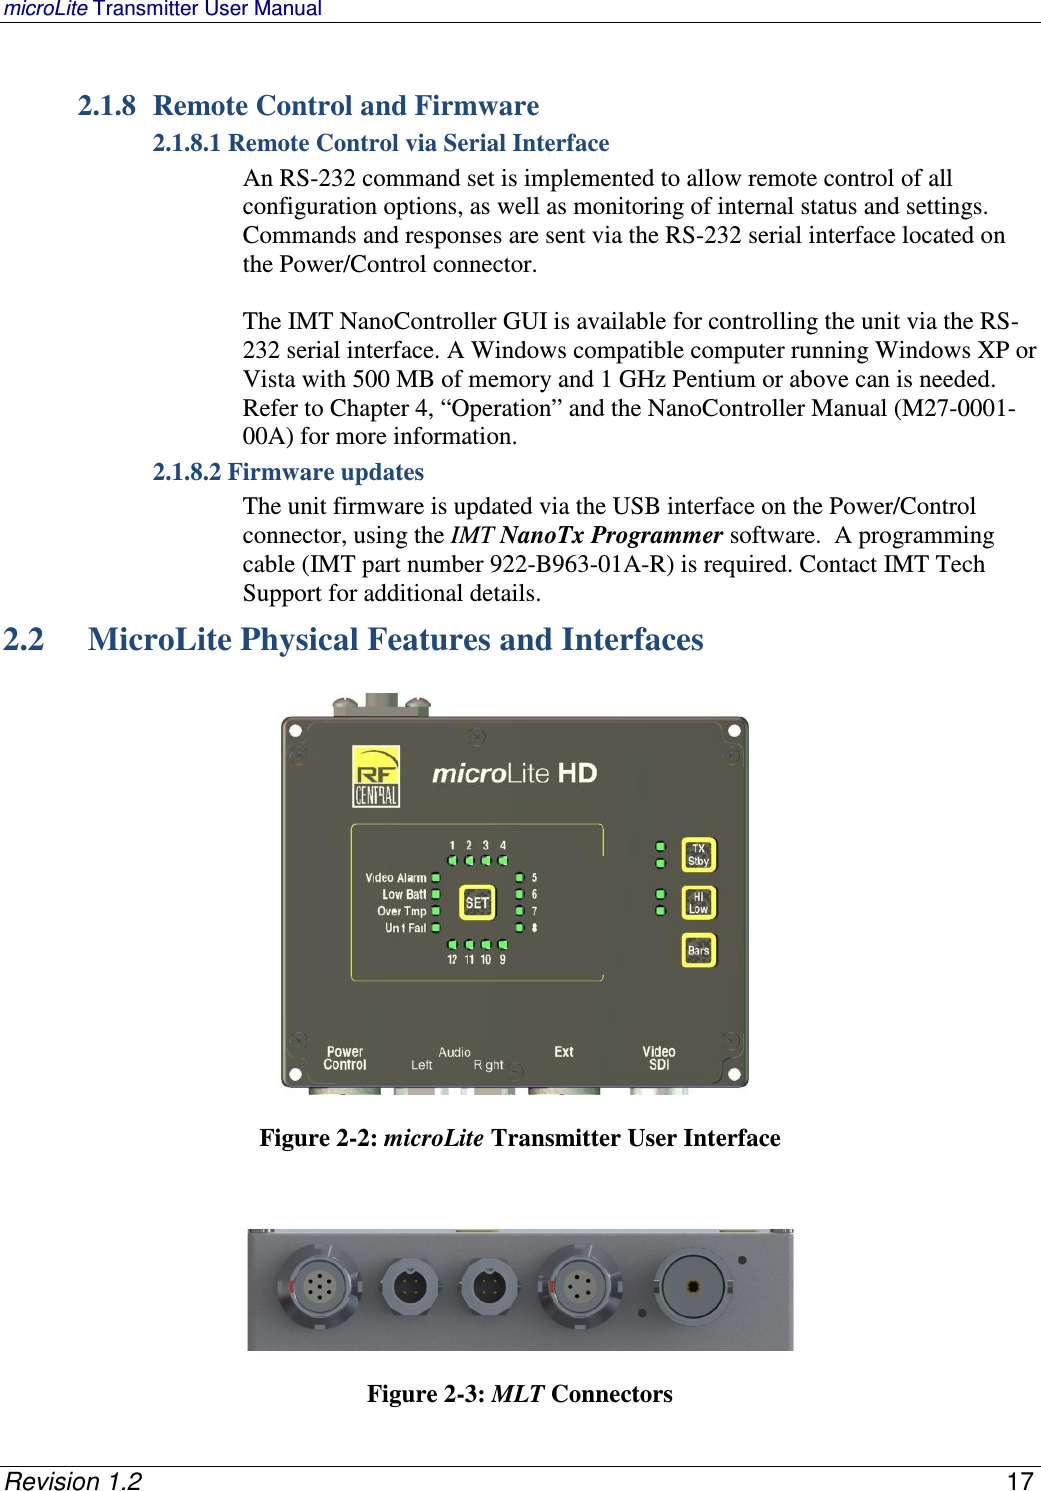 microLite Transmitter User Manual   Revision 1.2    17  2.1.8 Remote Control and Firmware 2.1.8.1 Remote Control via Serial Interface An RS-232 command set is implemented to allow remote control of all configuration options, as well as monitoring of internal status and settings.  Commands and responses are sent via the RS-232 serial interface located on the Power/Control connector.    The IMT NanoController GUI is available for controlling the unit via the RS-232 serial interface. A Windows compatible computer running Windows XP or Vista with 500 MB of memory and 1 GHz Pentium or above can is needed.  Refer to Chapter 4, “Operation” and the NanoController Manual (M27-0001-00A) for more information.   2.1.8.2 Firmware updates  The unit firmware is updated via the USB interface on the Power/Control connector, using the IMT NanoTx Programmer software.  A programming cable (IMT part number 922-B963-01A-R) is required. Contact IMT Tech Support for additional details. 2.2  MicroLite Physical Features and Interfaces     Figure 2-2: microLite Transmitter User Interface      Figure 2-3: MLT Connectors 